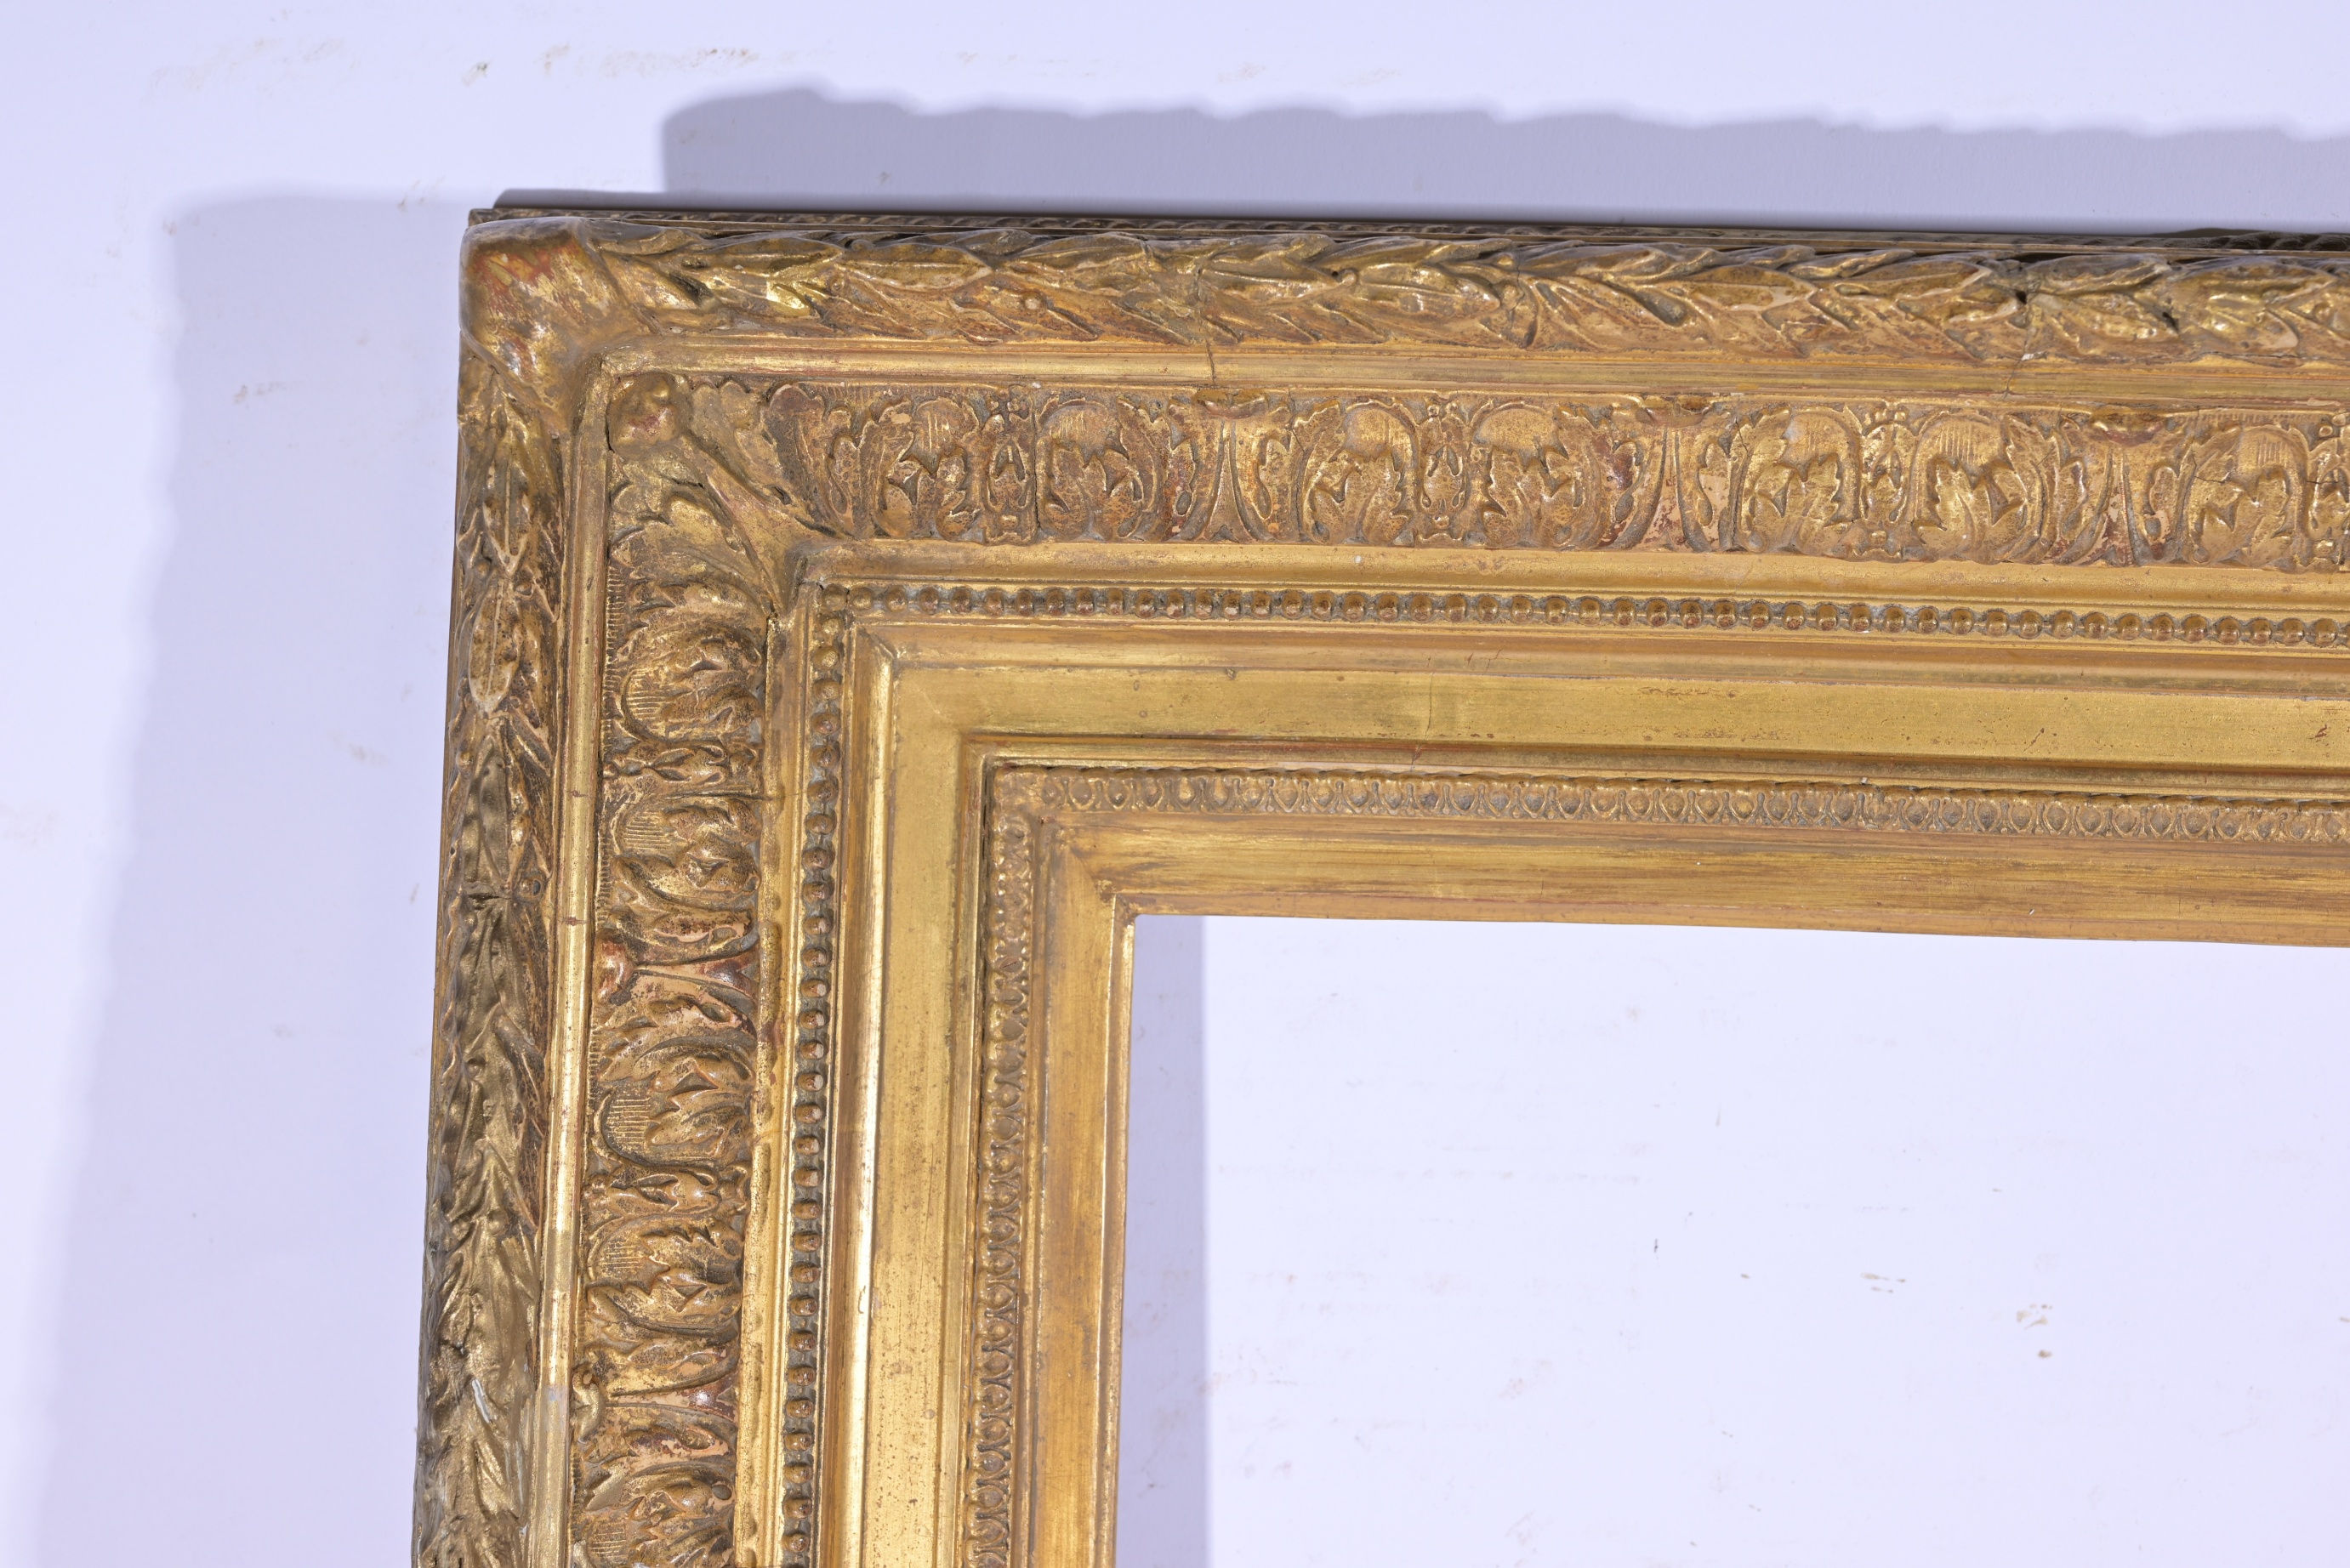 French,19th century Gilt Wood Frame - 28 x 18 - Image 3 of 9